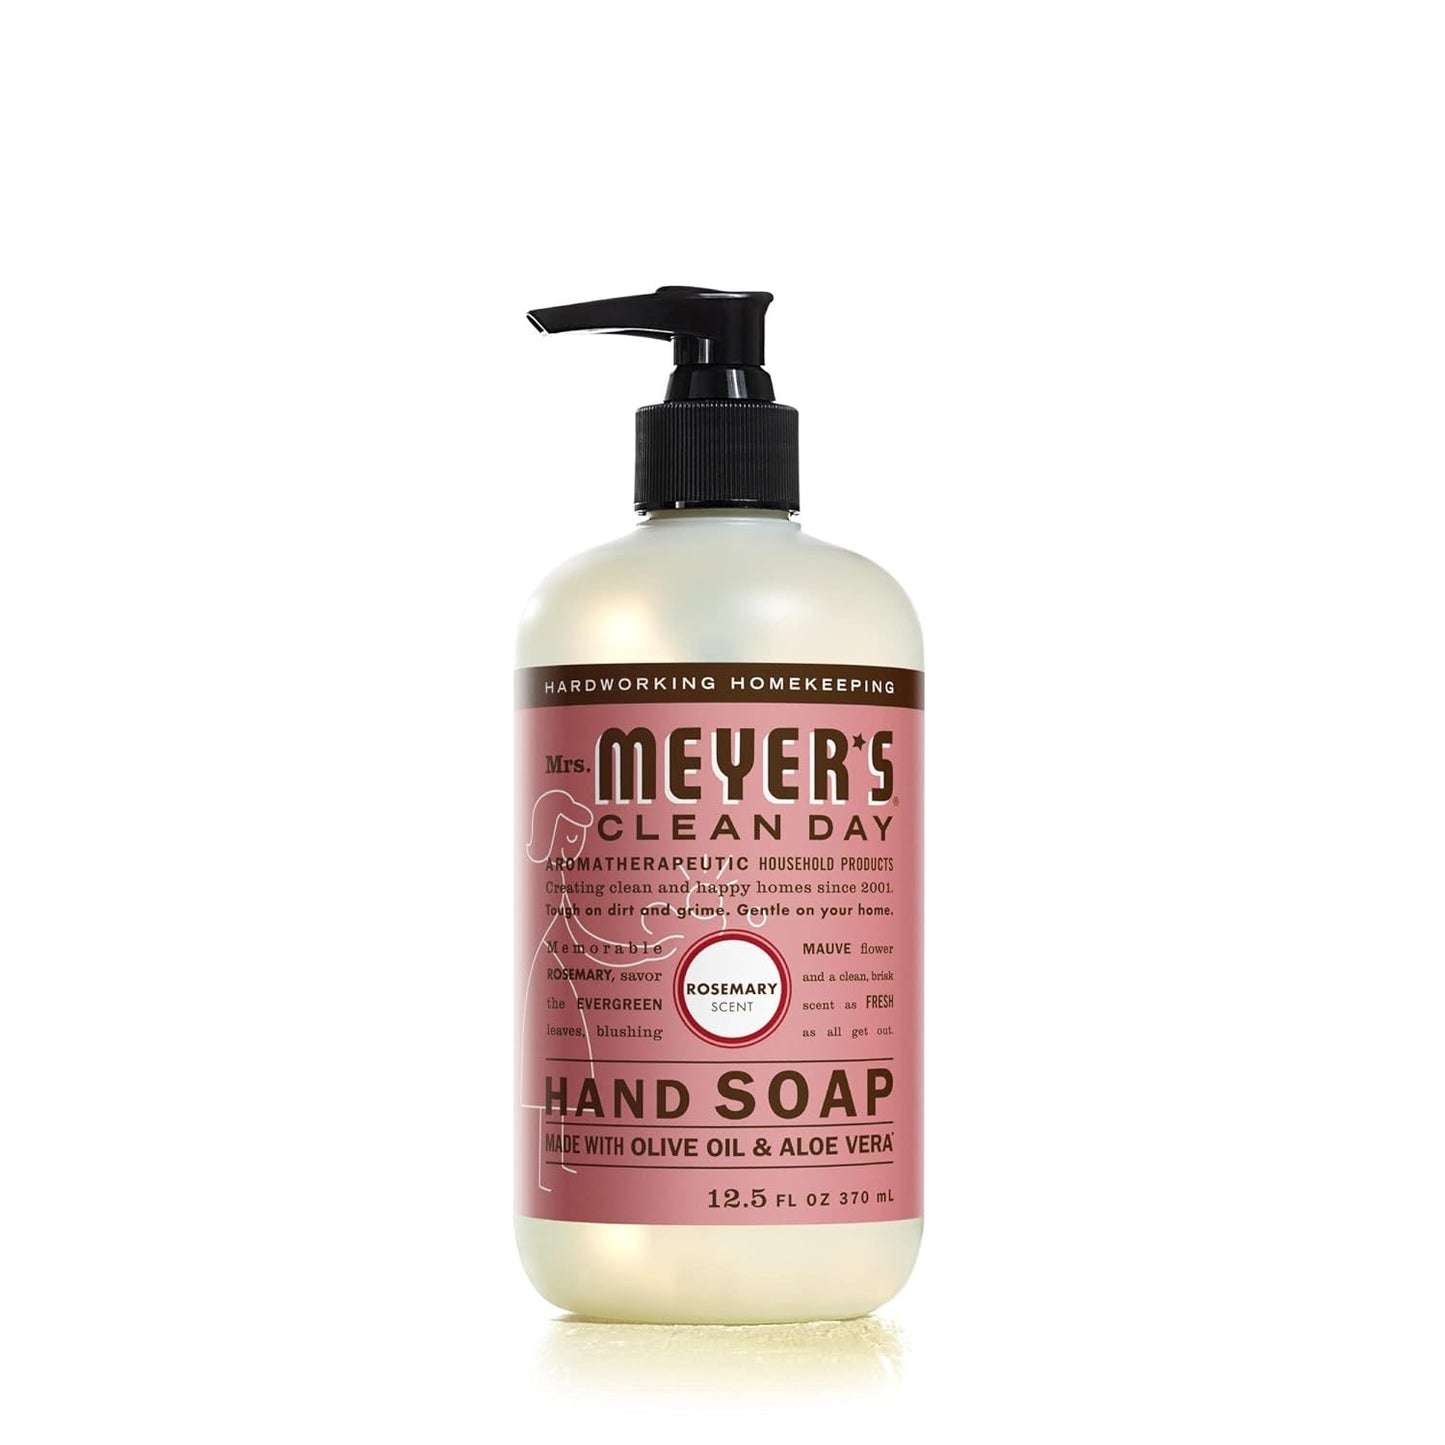 MRS. MEYER'S CLEAN DAY Hand Soap Refill, Made with Essential Oils, Biodegradable Formula, Basil, 33 fl. oz - Premium Hand Soap Refill from Concordia Style Boutique - Just $15.41! Shop now at Concordia Style Boutique